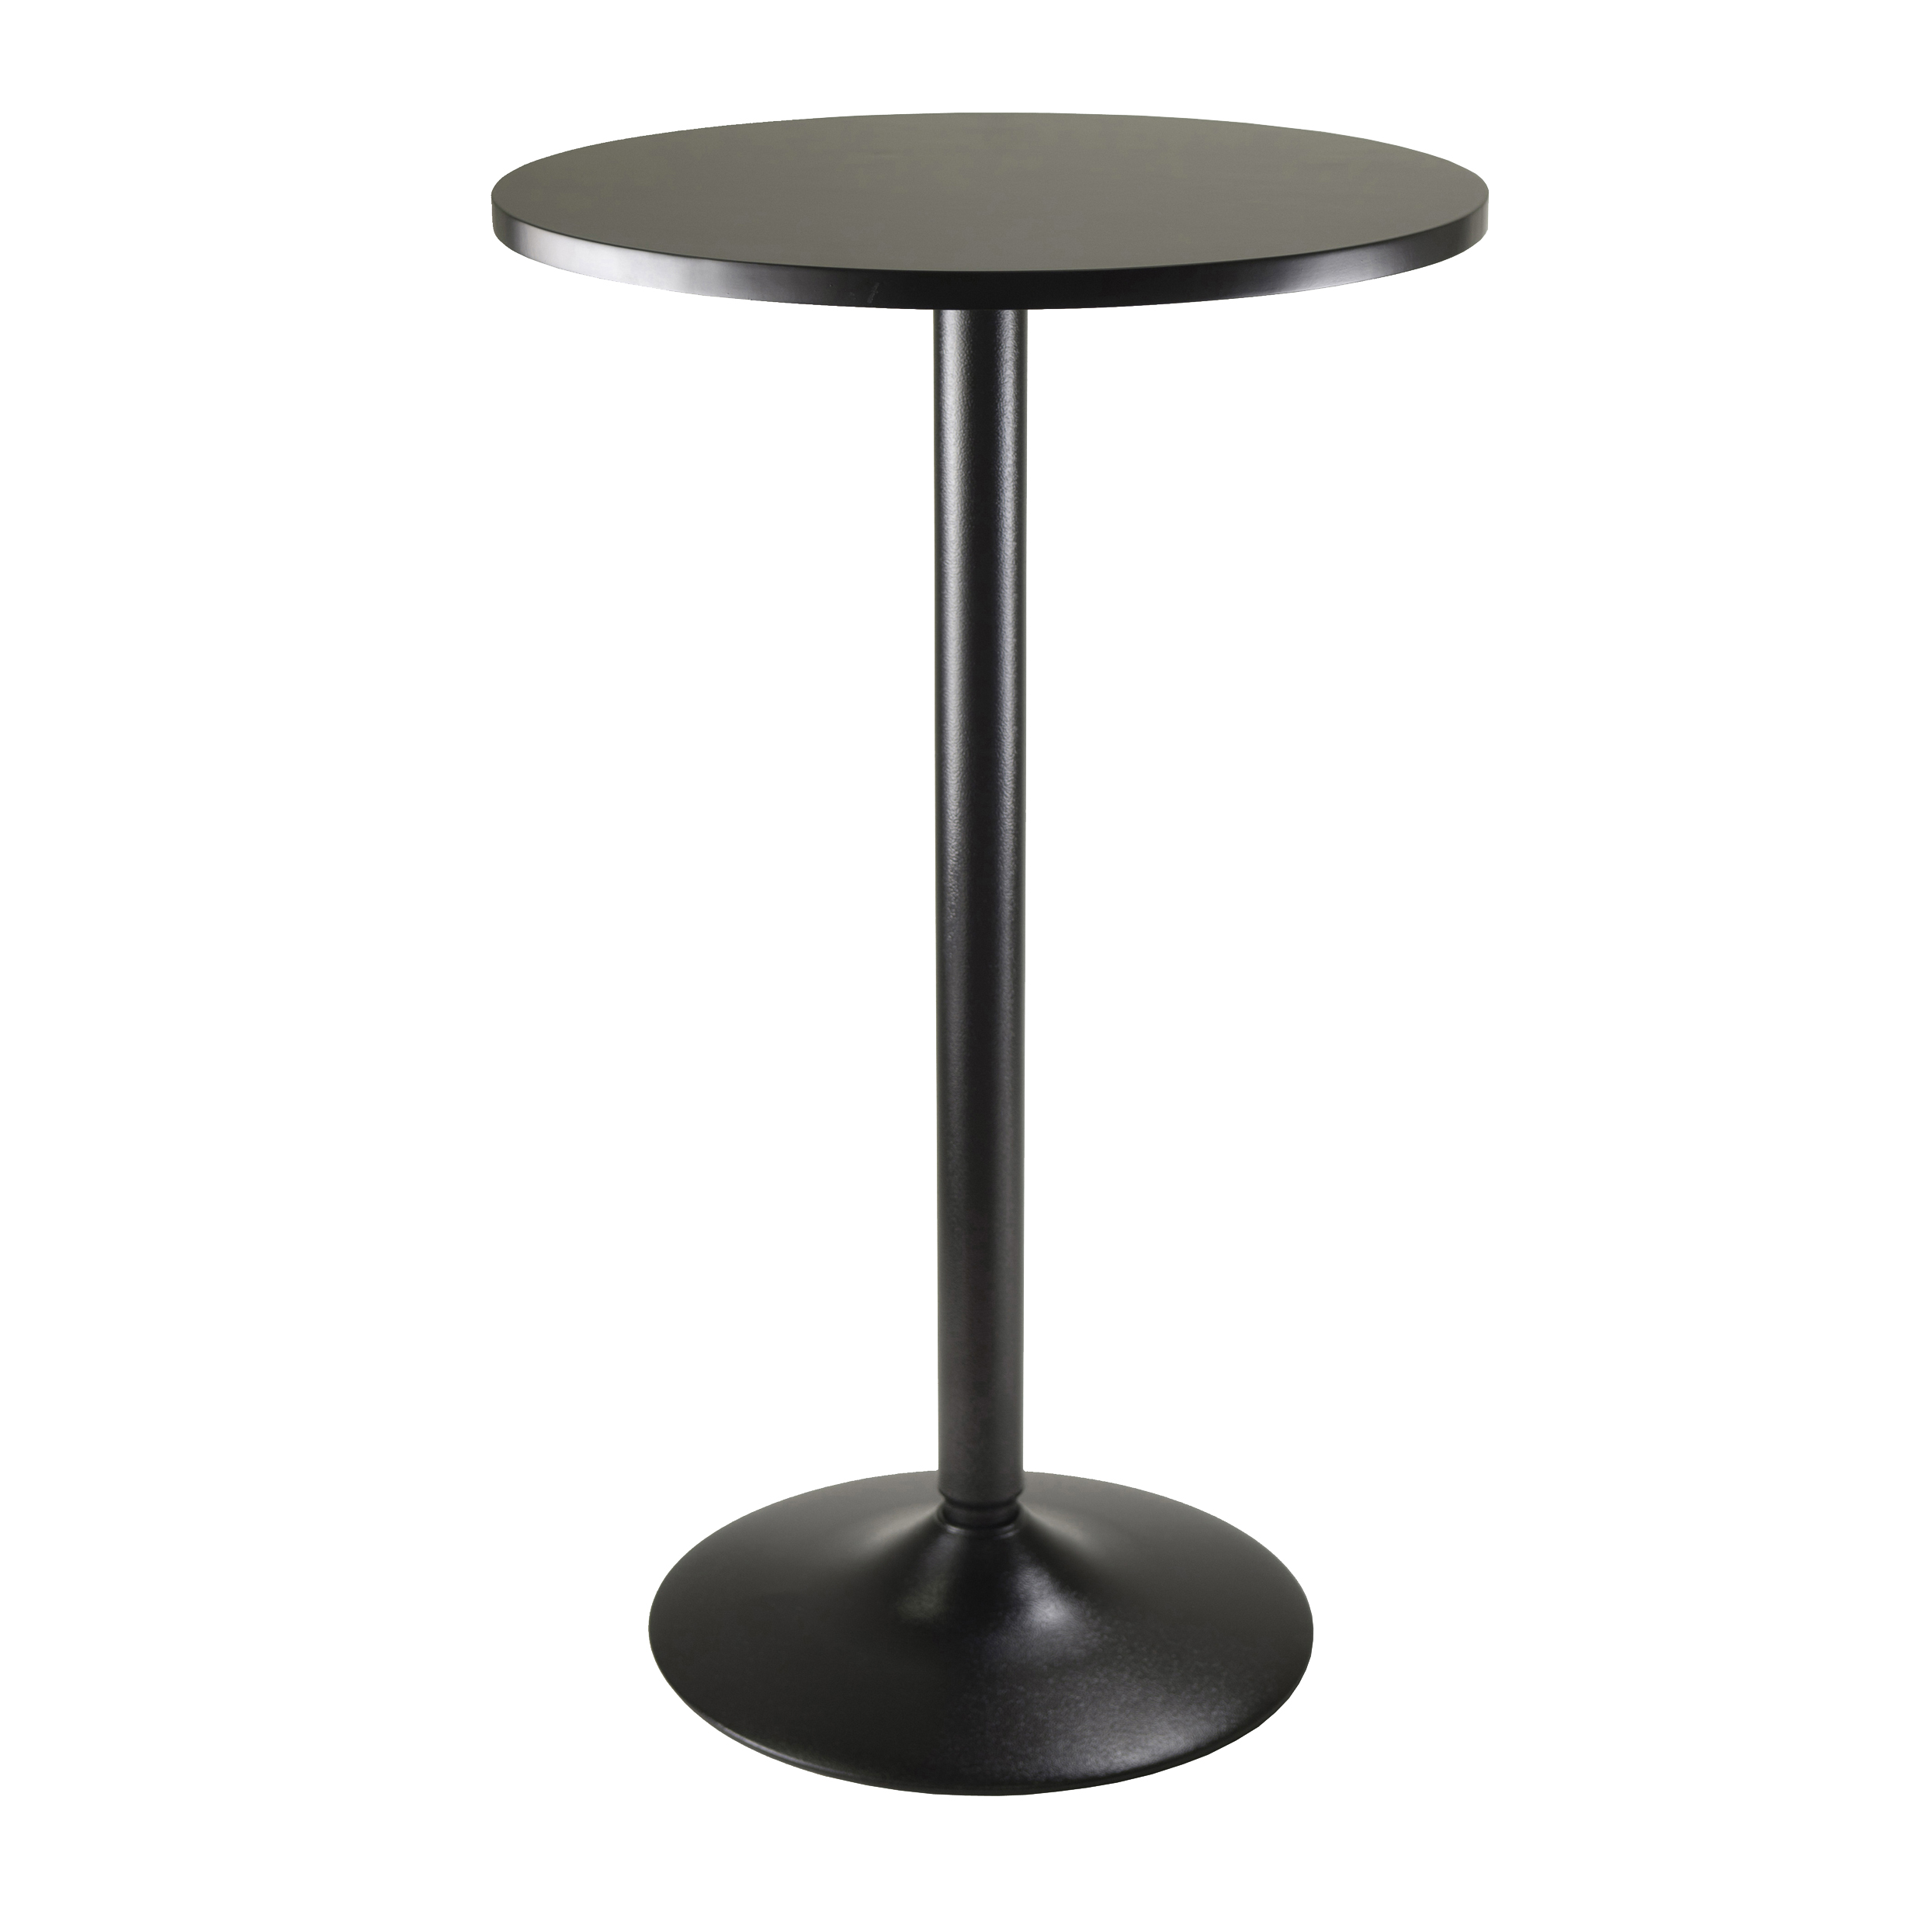 Winsome Obsidian Round Pub Table with MDF Wood Top, Legs, and Base, Black - image 1 of 7